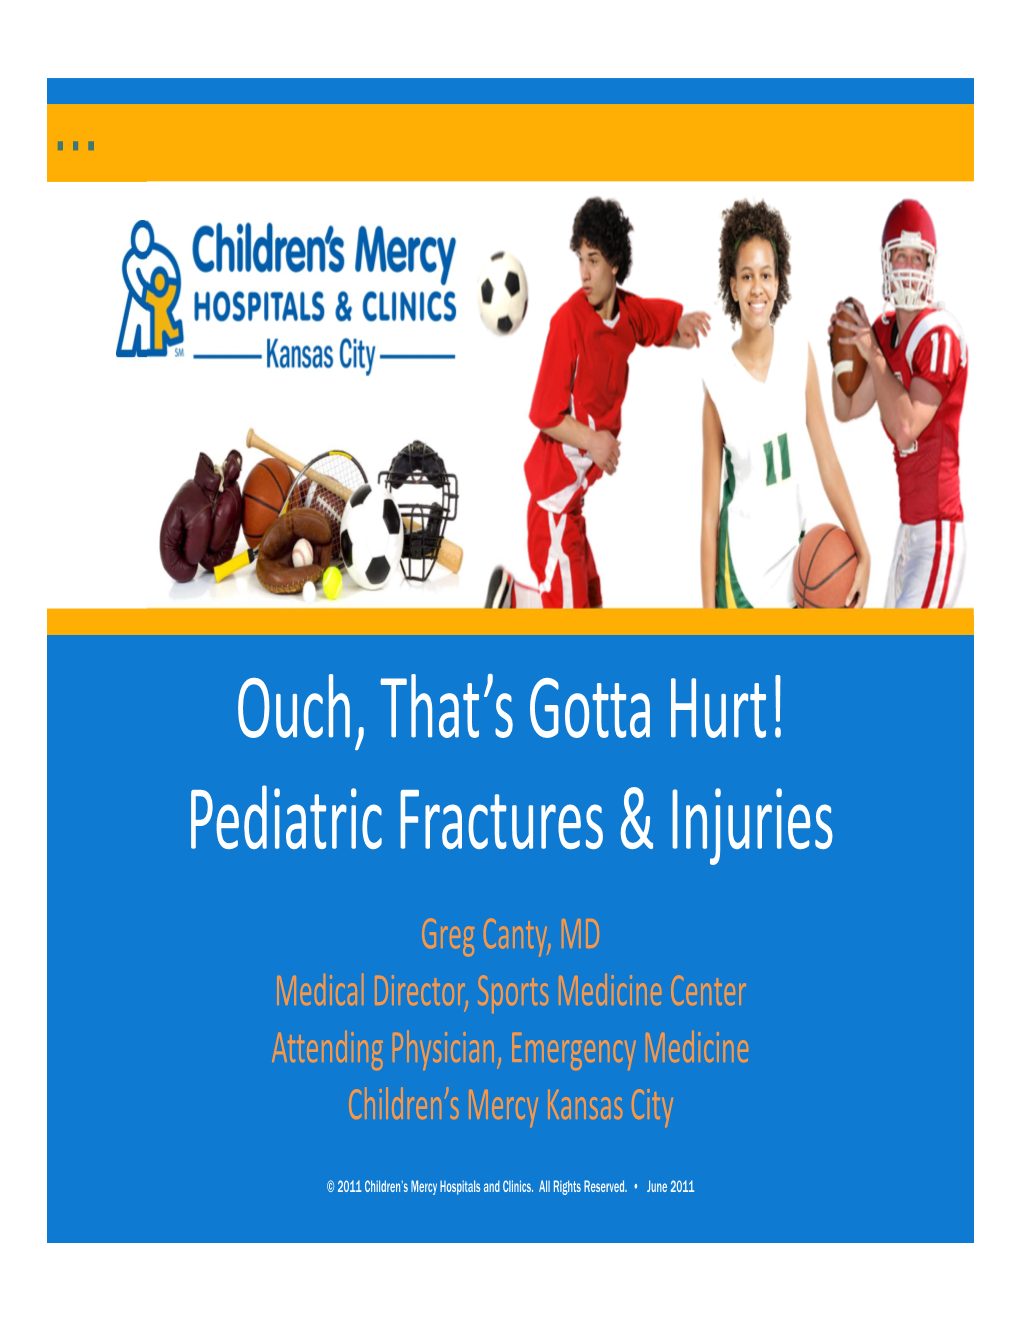 Ouch, That's Gotta Hurt! Pediatric Fractures & Injuries